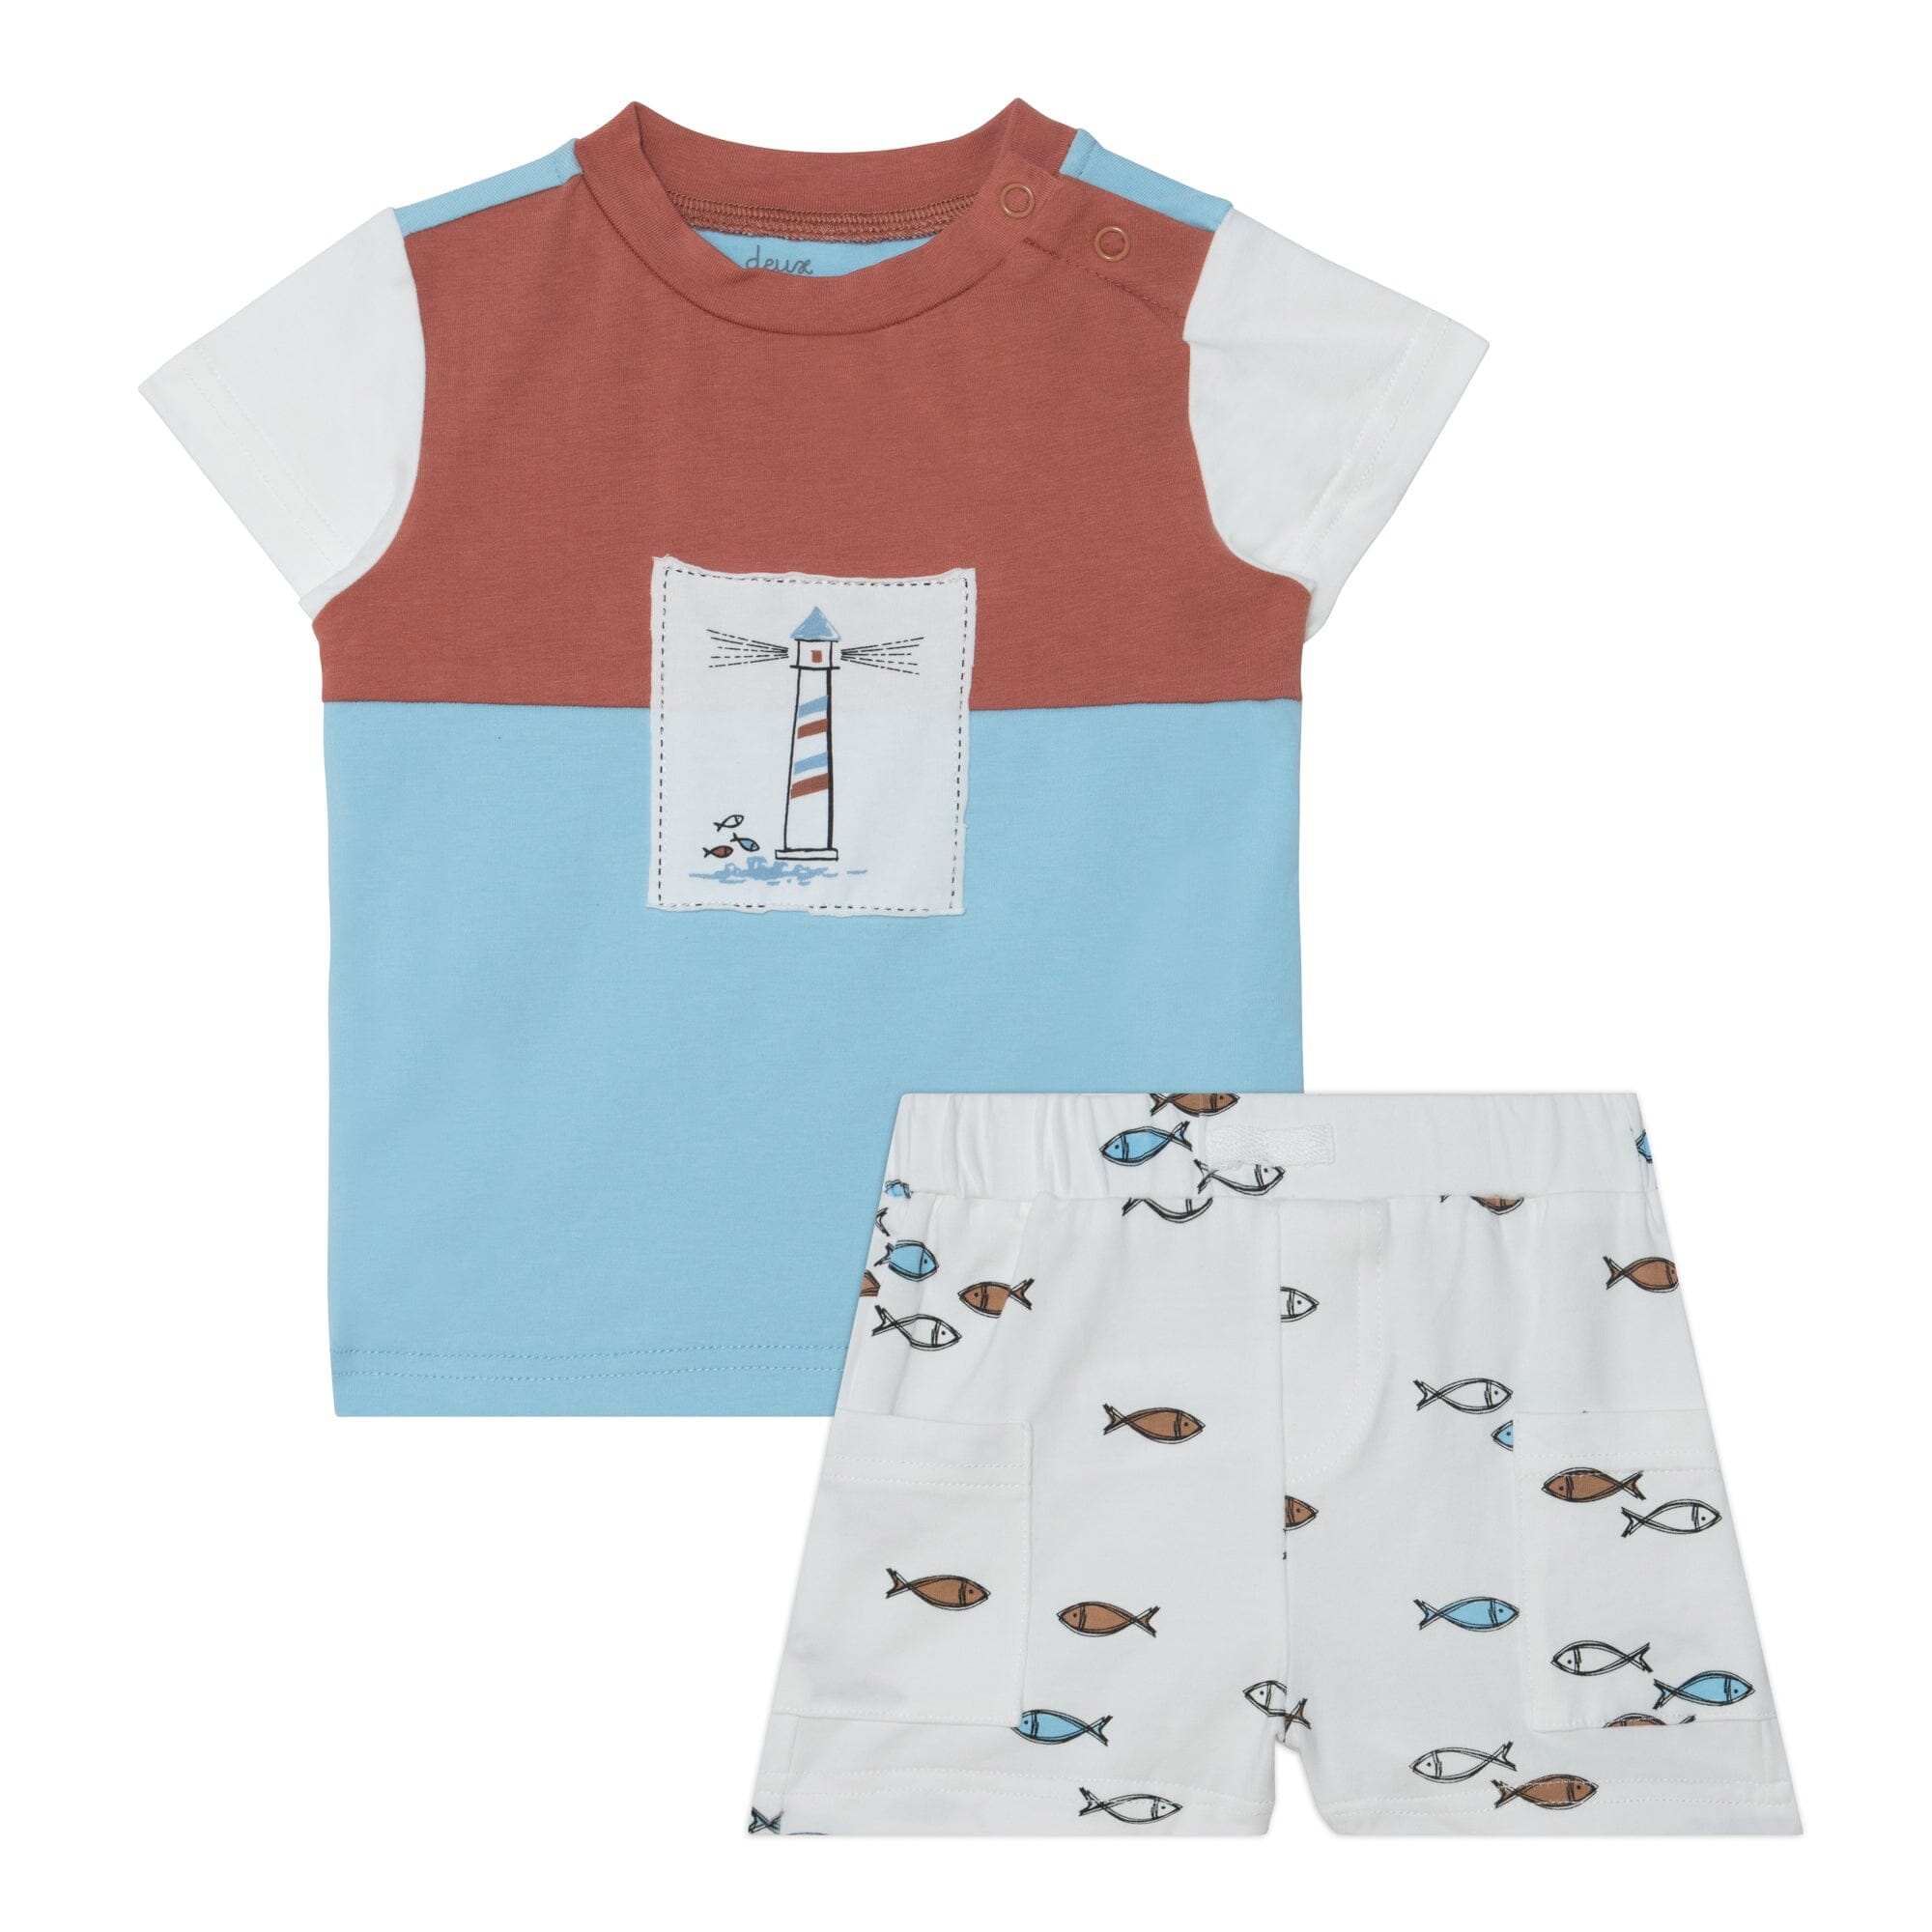 Organic Cotton Colorblocked Top & Short Set Brown & Blue With White Fish Print - E30C11_063